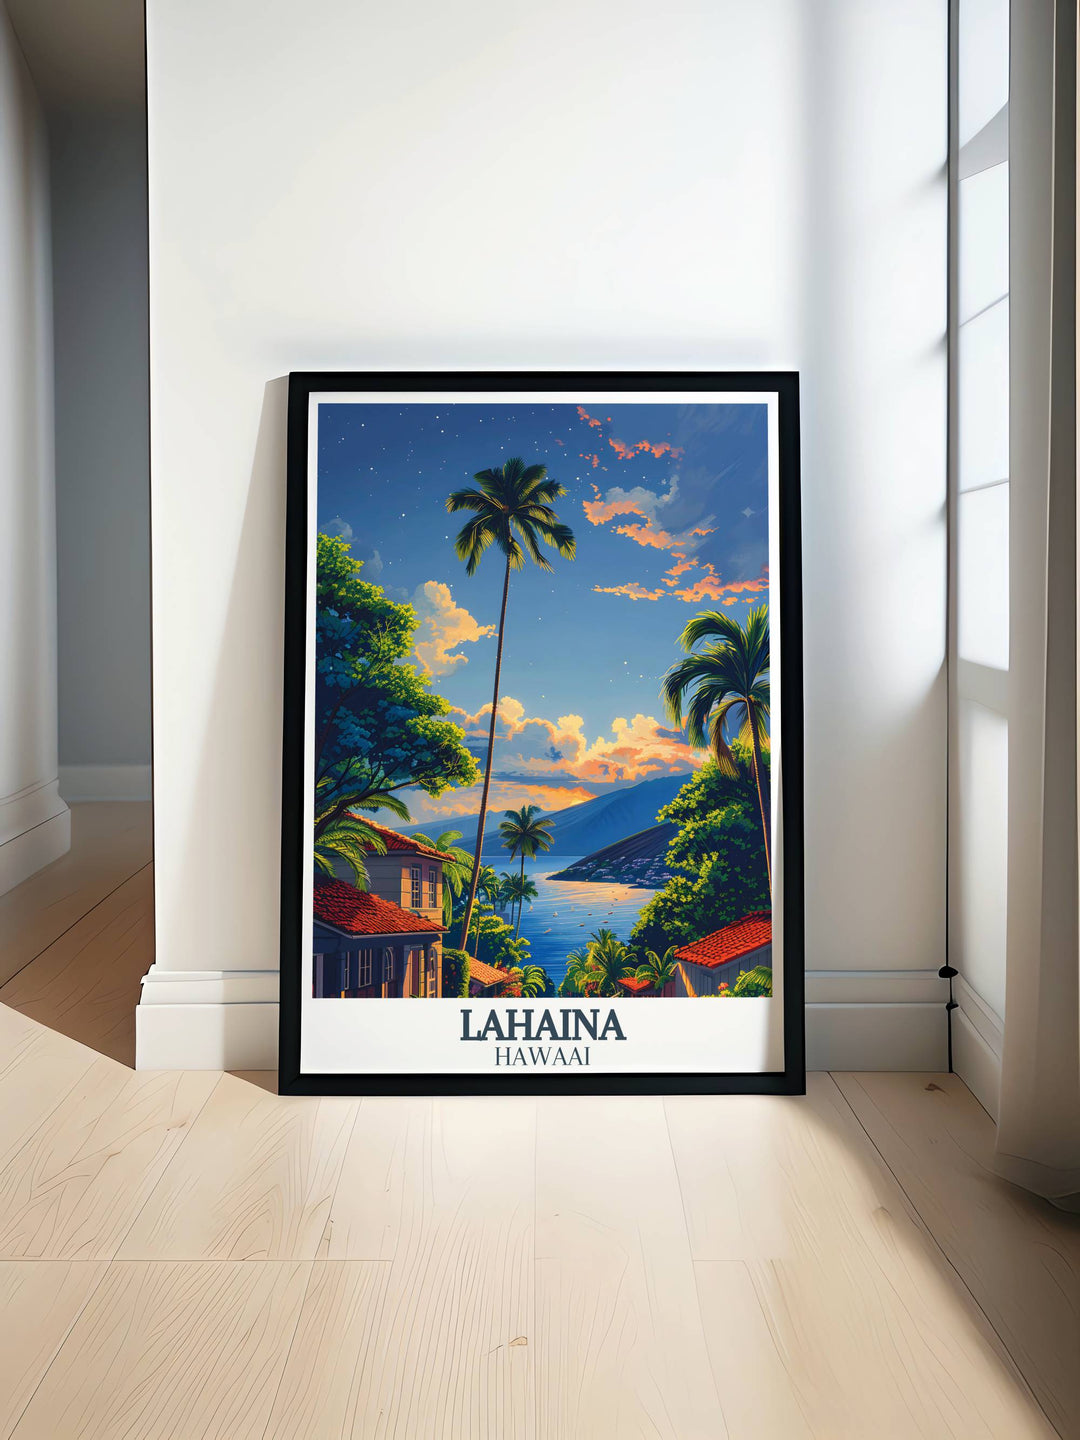 Vibrant depiction of Lahaina Hawaii in a travel print, showcasing the iconic coastal views perfect for enhancing tropical wall decor or as a standout travel enthusiast gift.